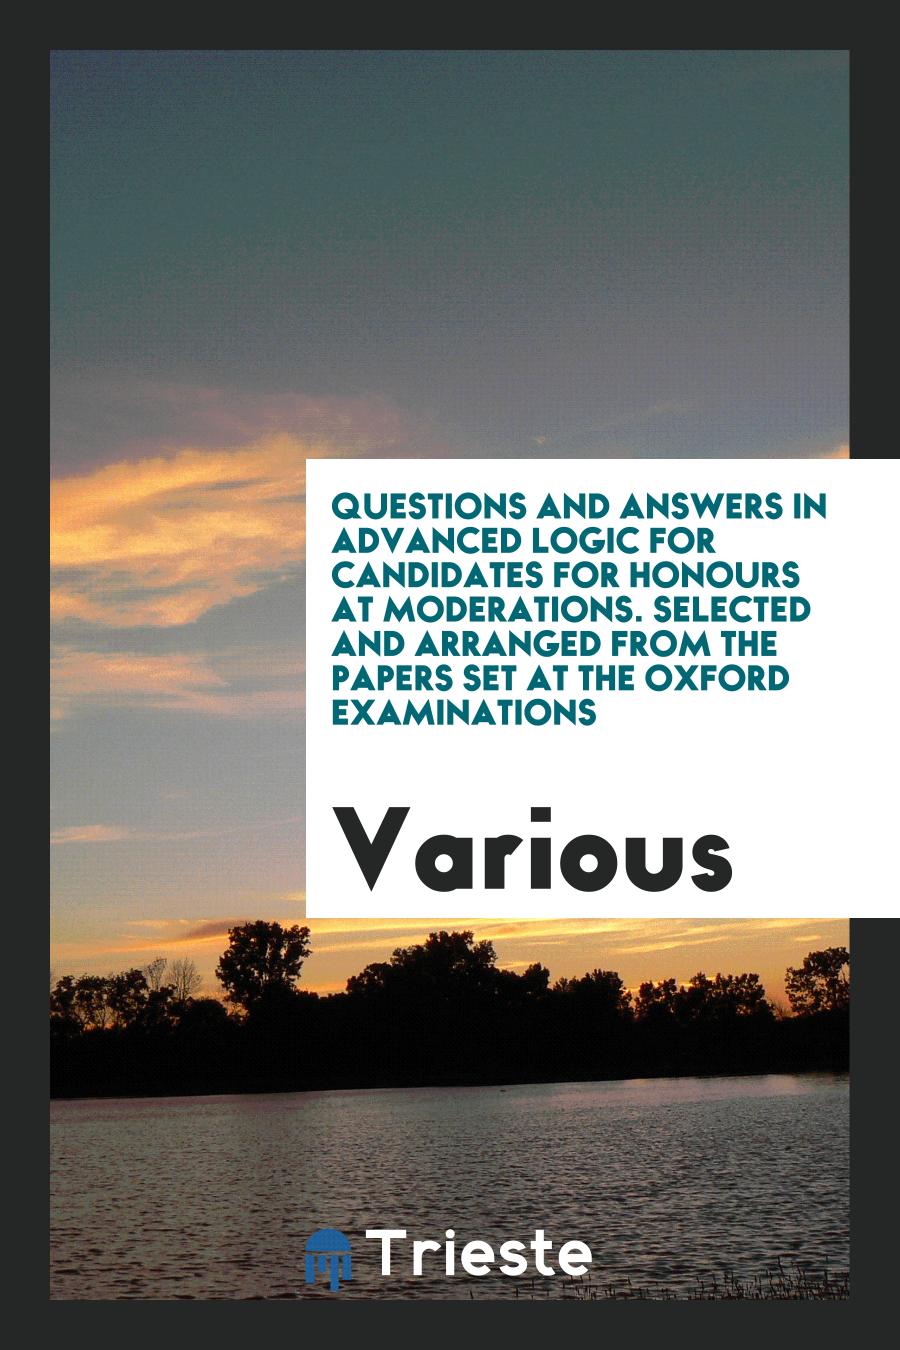 Questions and answers in advanced logic for candidates for honours at moderations. Selected and arranged from the papers set at the Oxford examinations